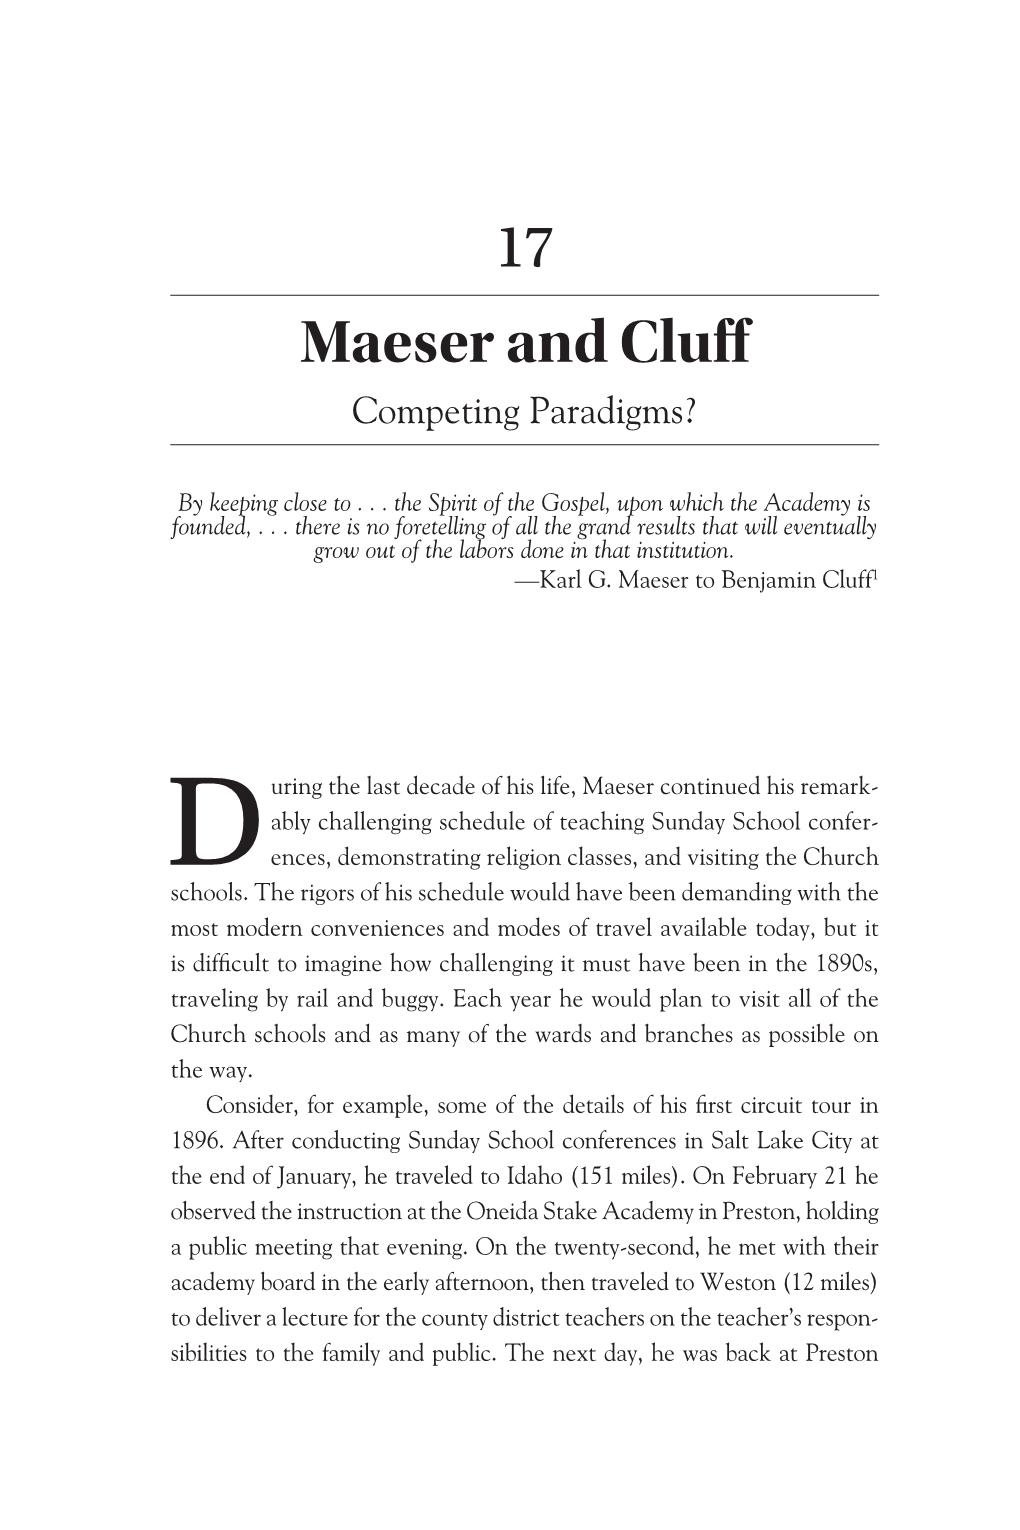 Maeser and Clu Competing Paradigms?